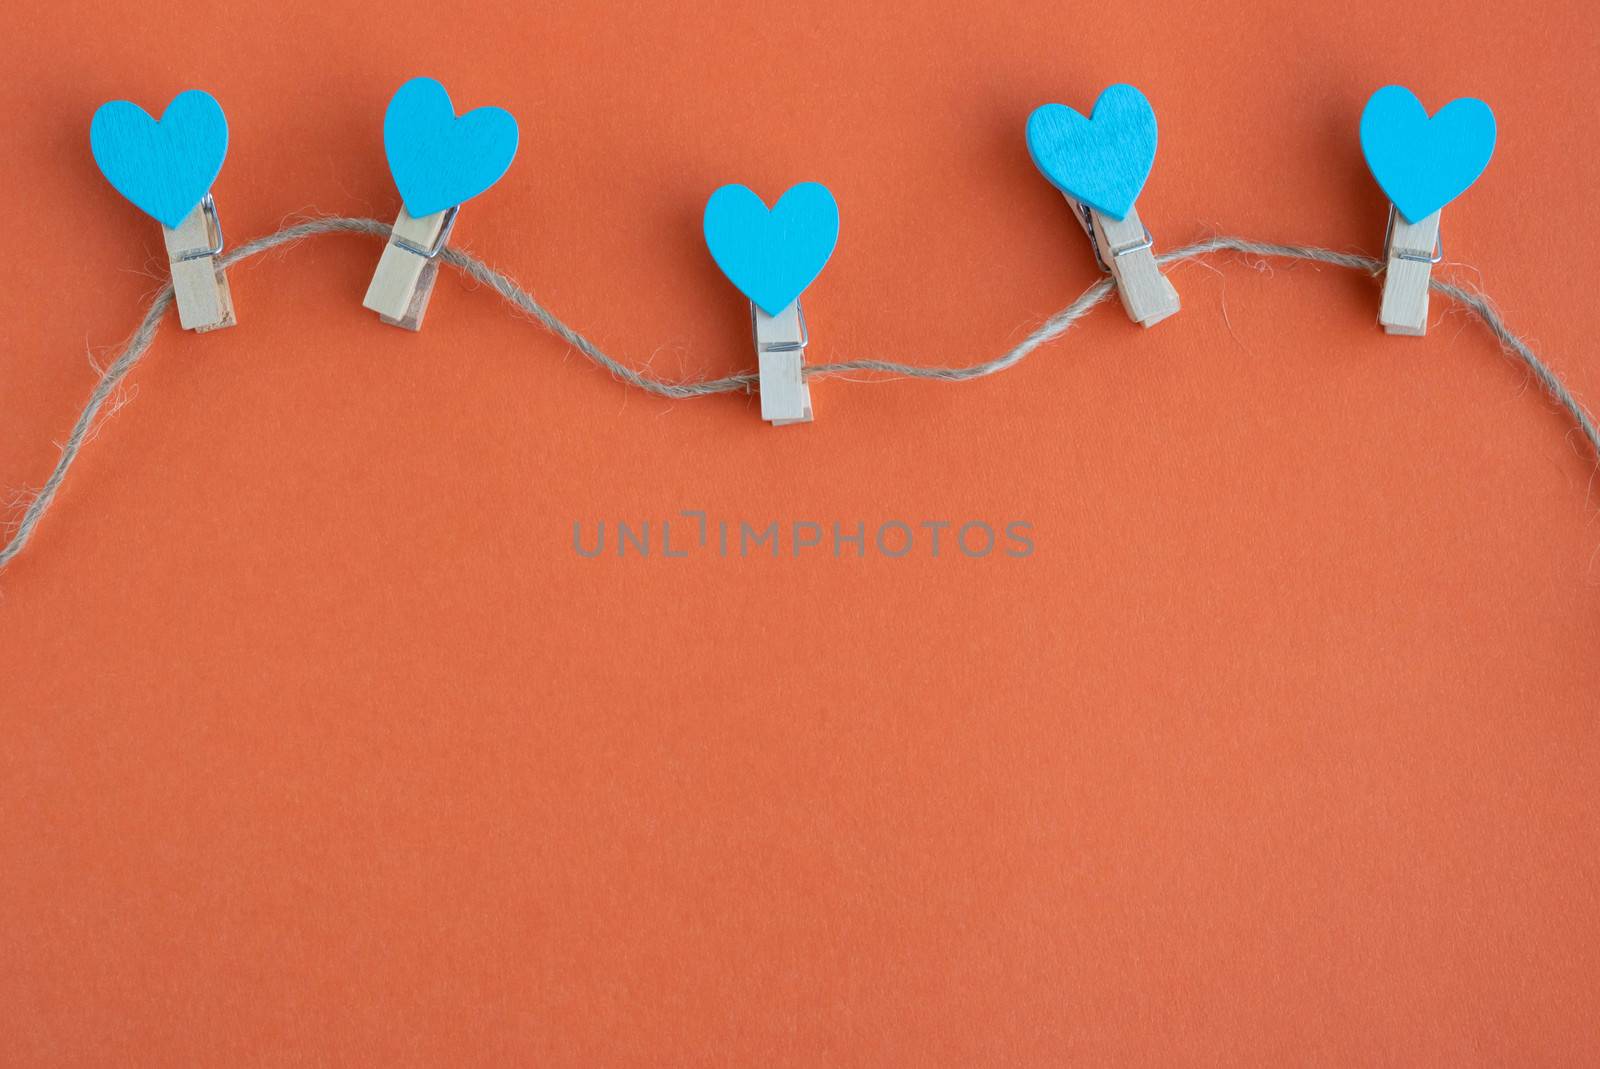 Small clothespins and blue hearts on a rope on an orange background. by lapushka62